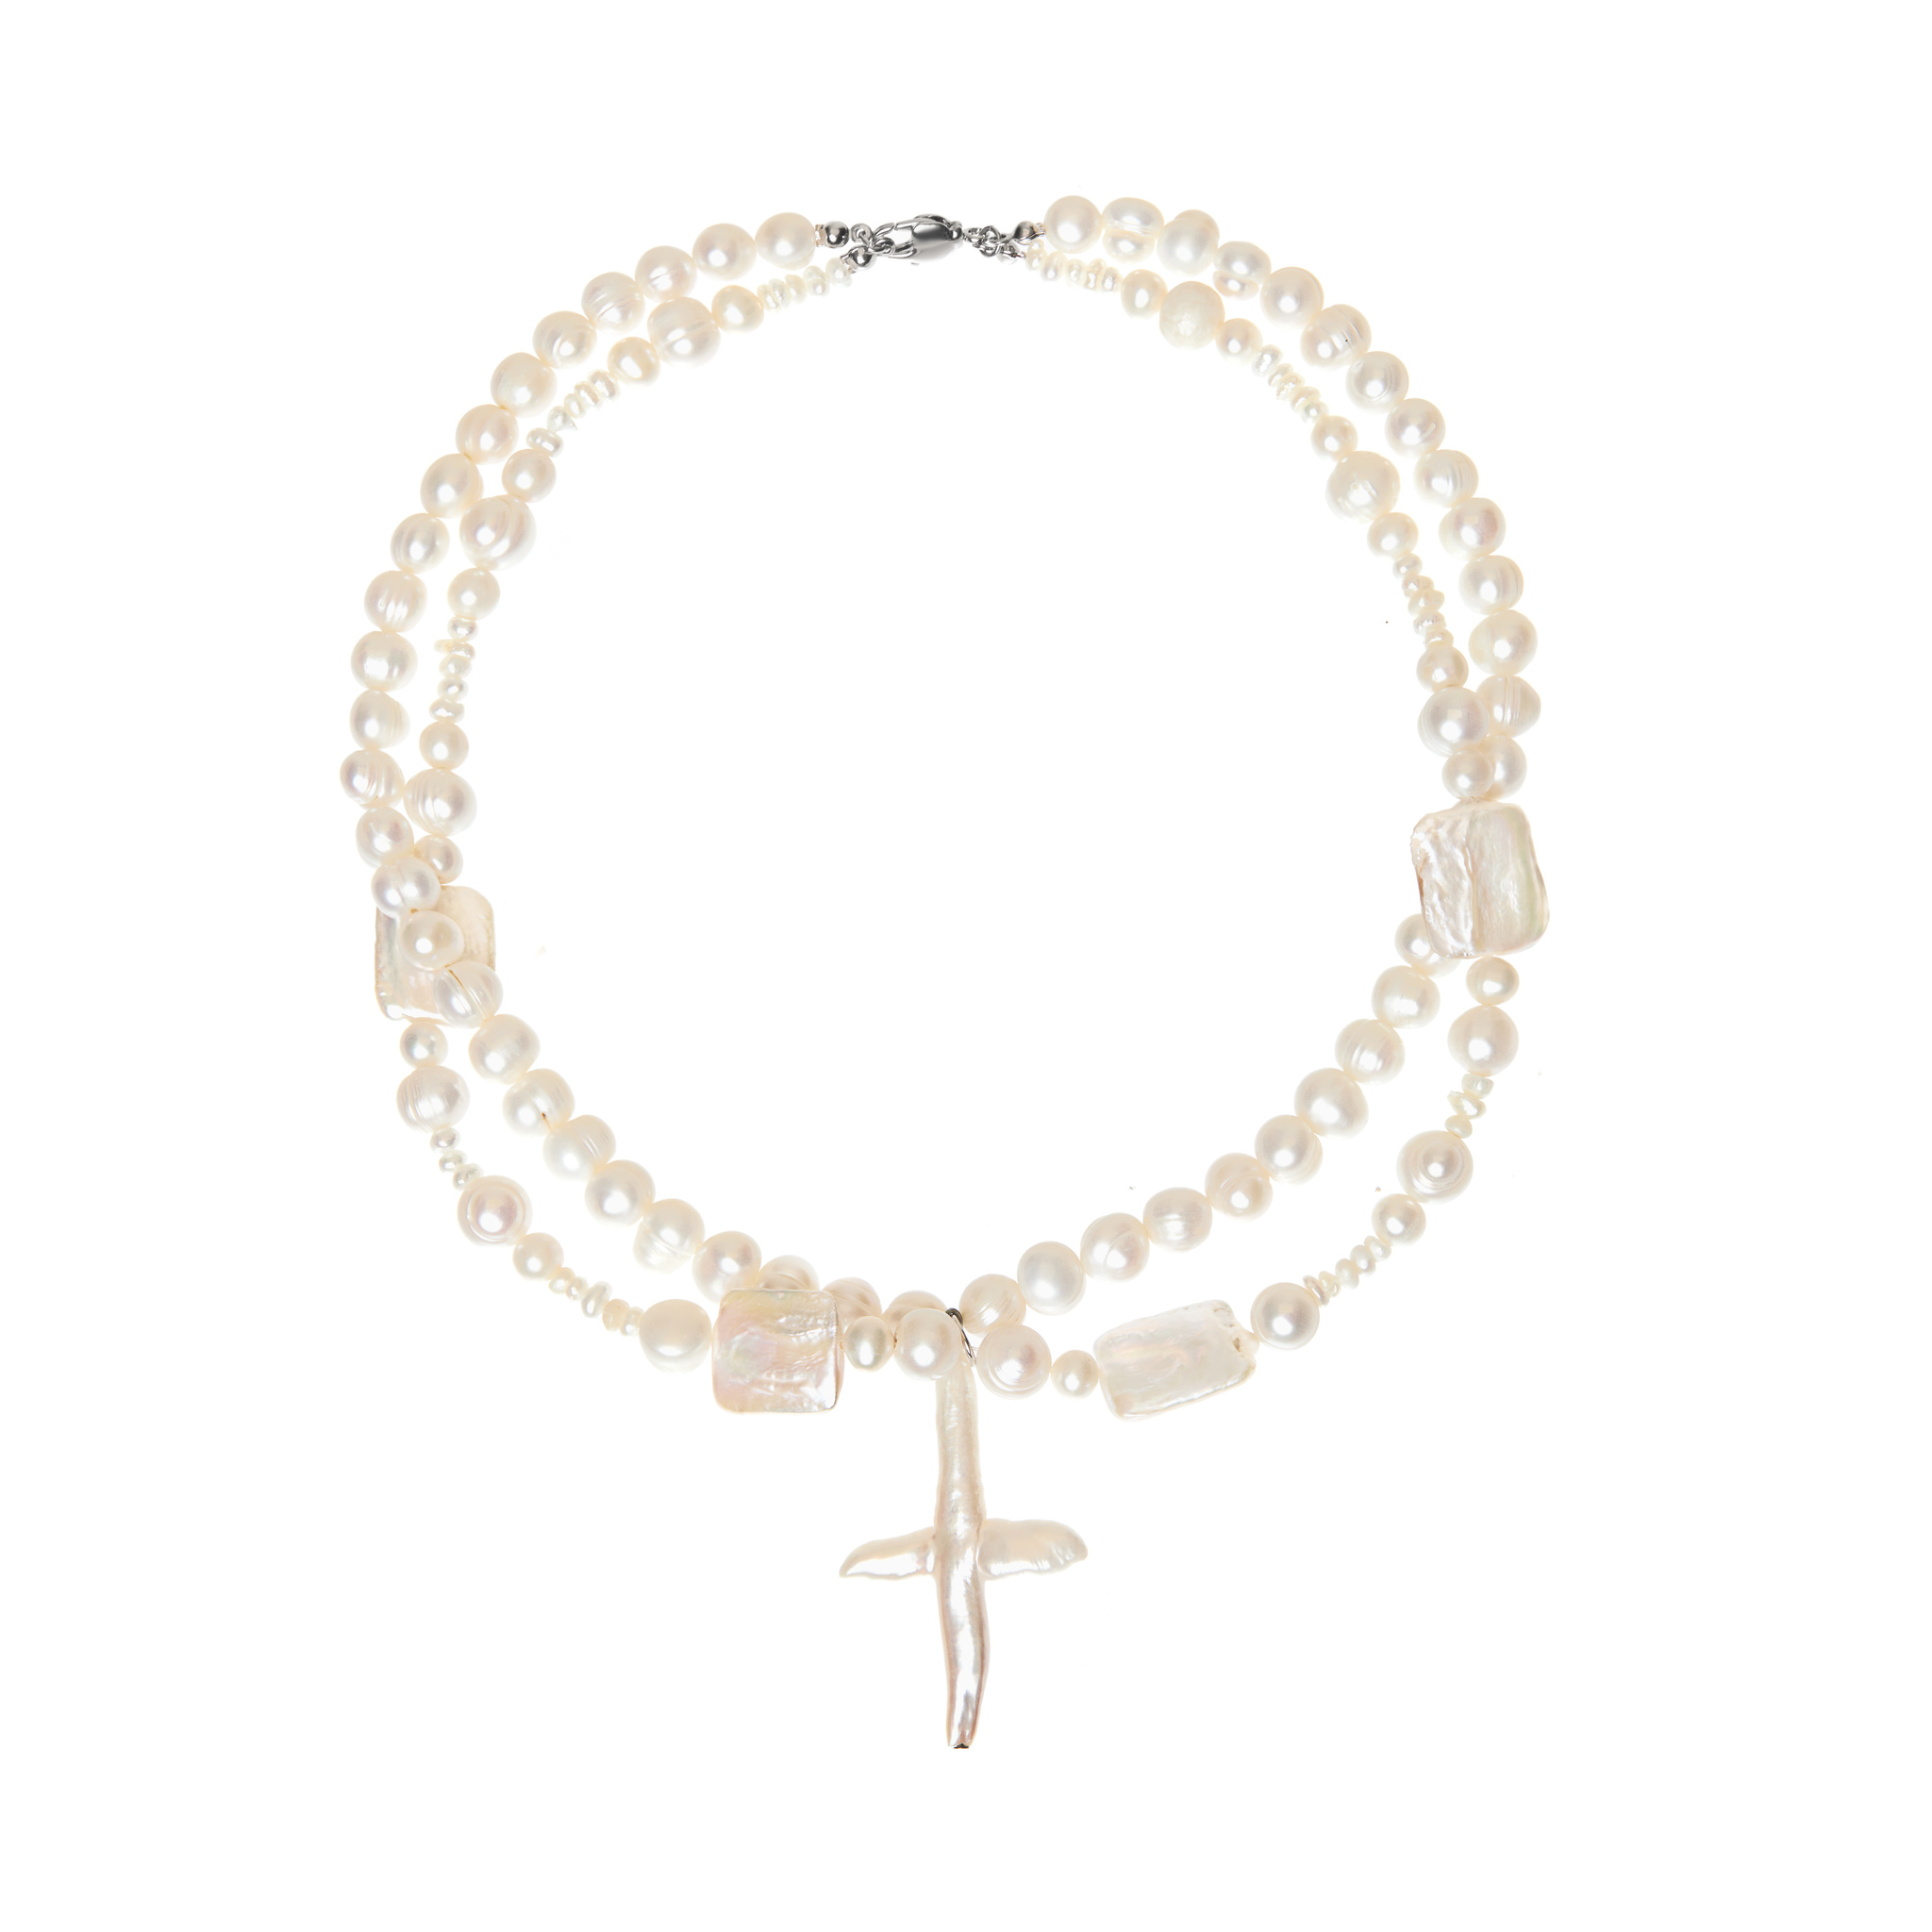 HOLLY JUNE Колье Pearly Abundance Cross Necklace – Nacre holly june брошь pearly nuance brooch